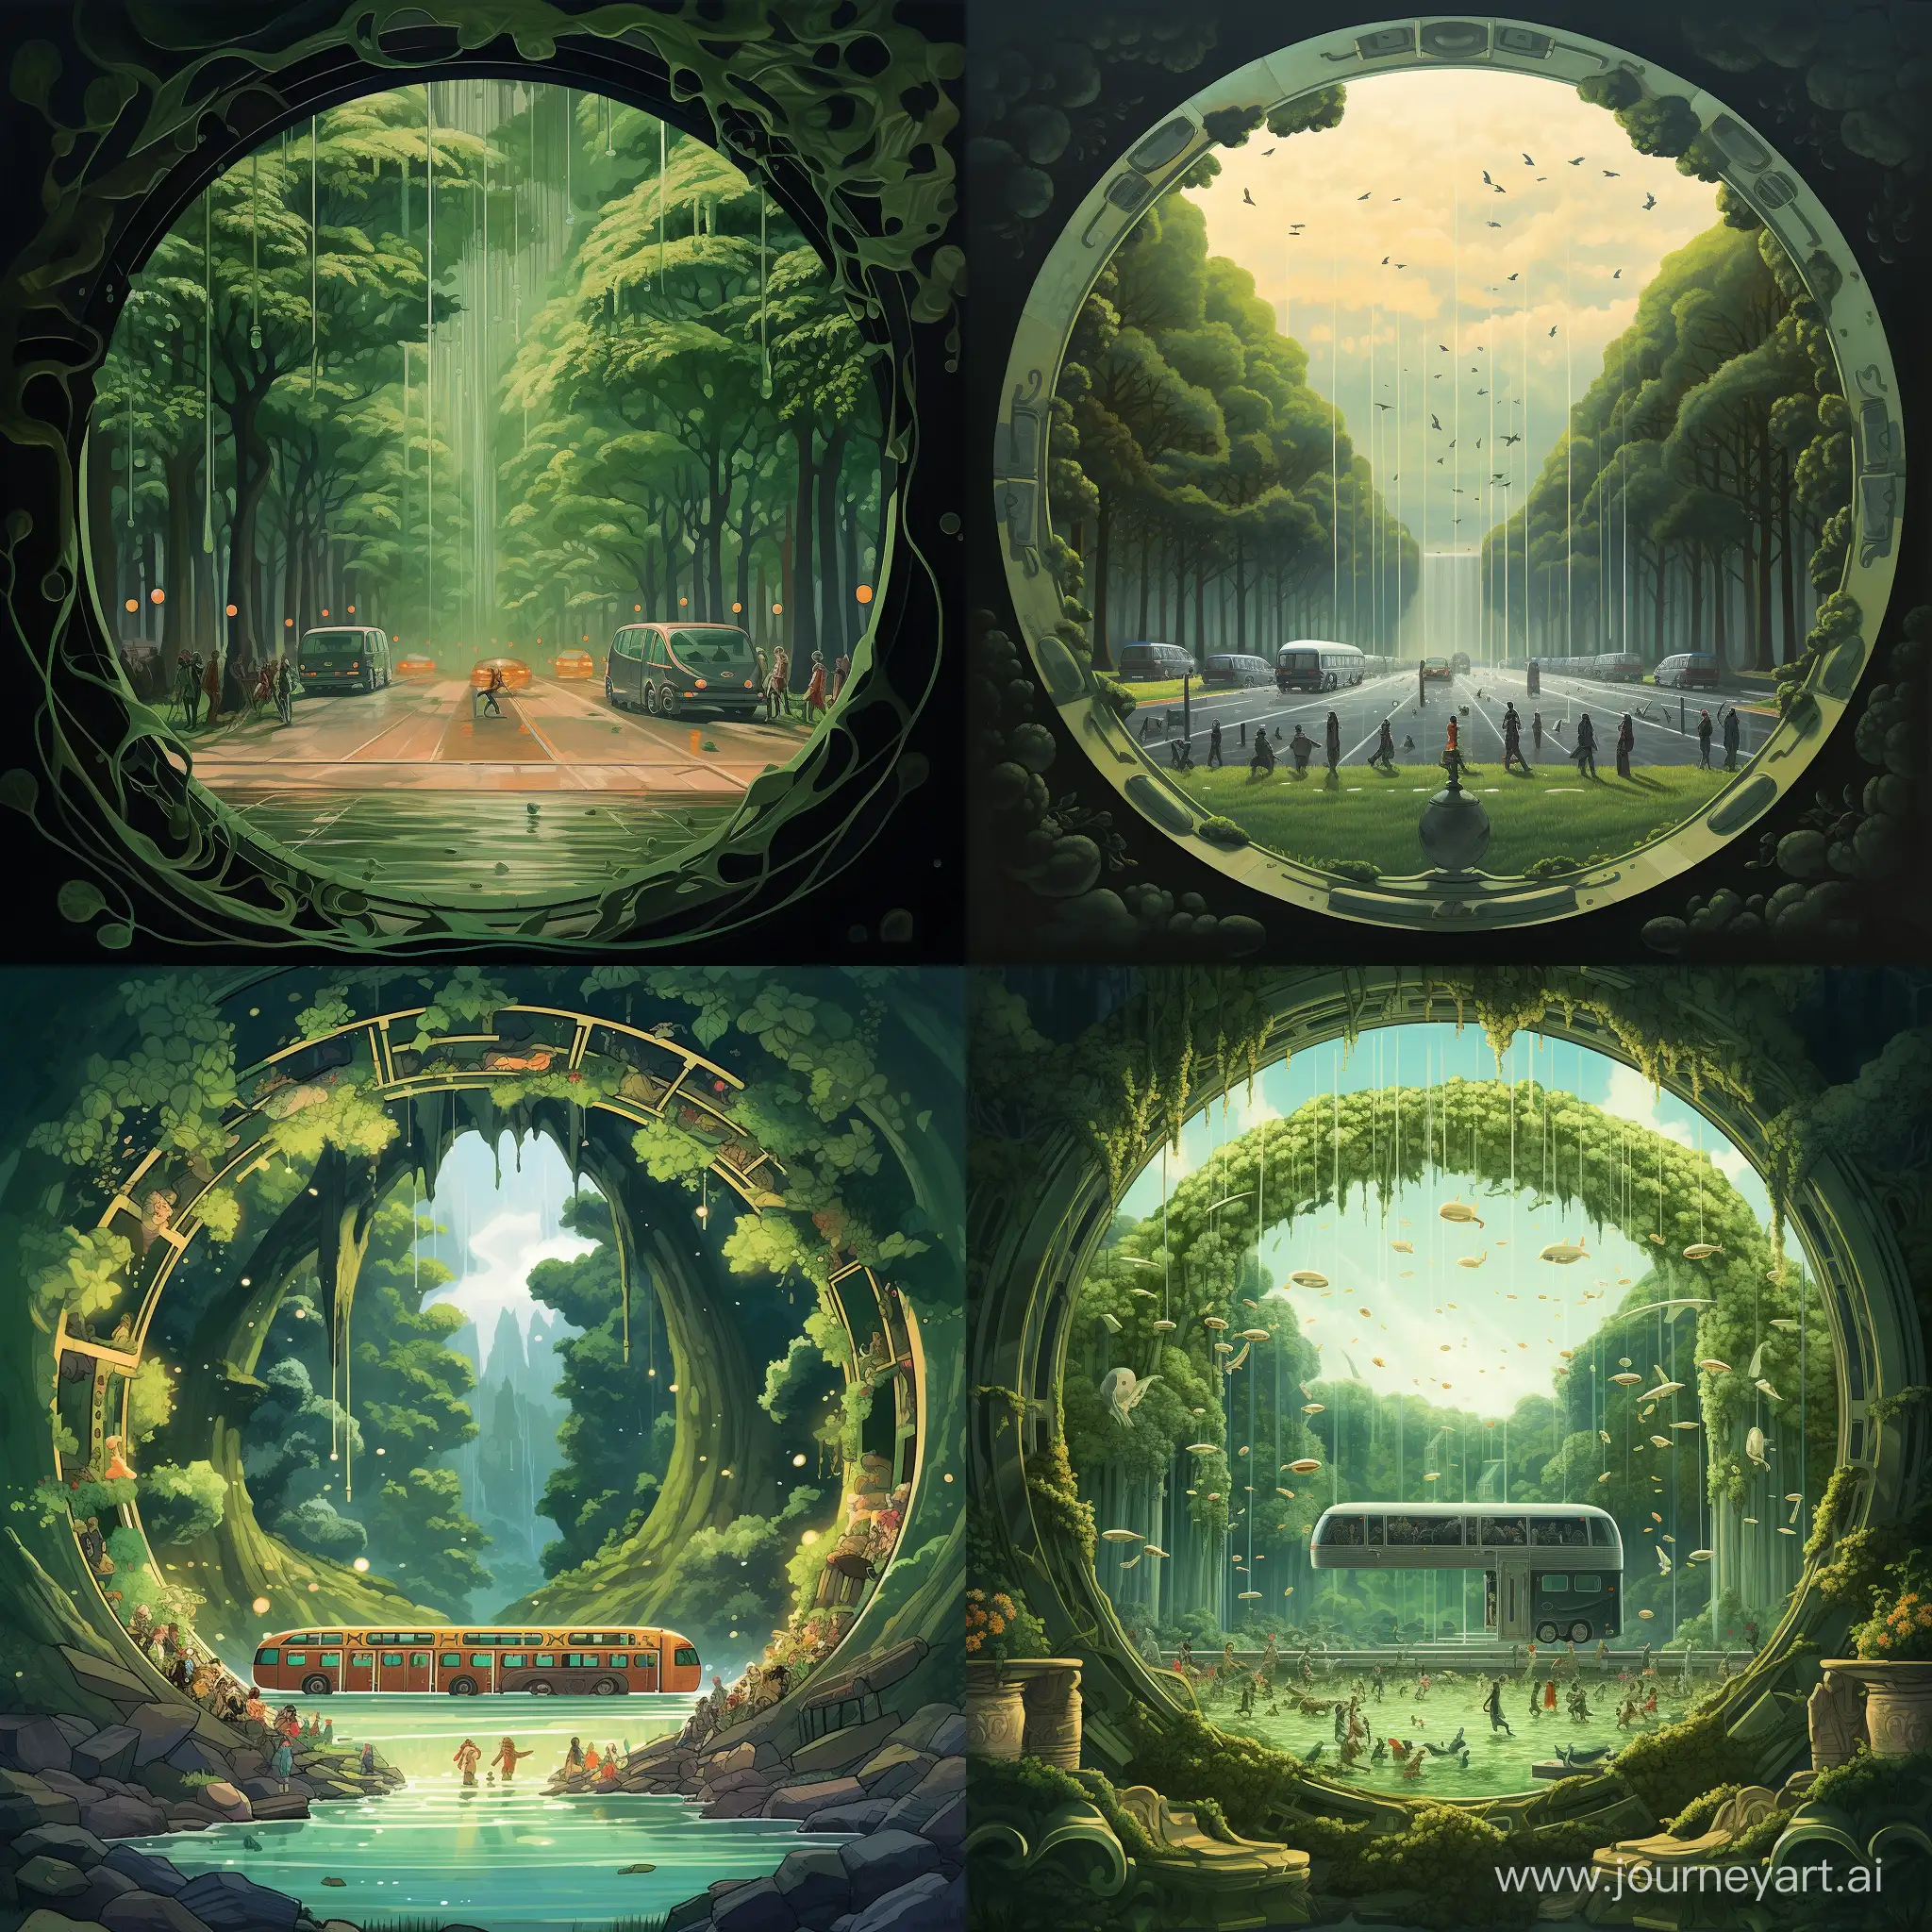 A column of buses with grandmothers drives into a circular magical portal. Outside the portal it's raining, gloomy, evening. Inside the portal, it's sunny, green everywhere, a lake